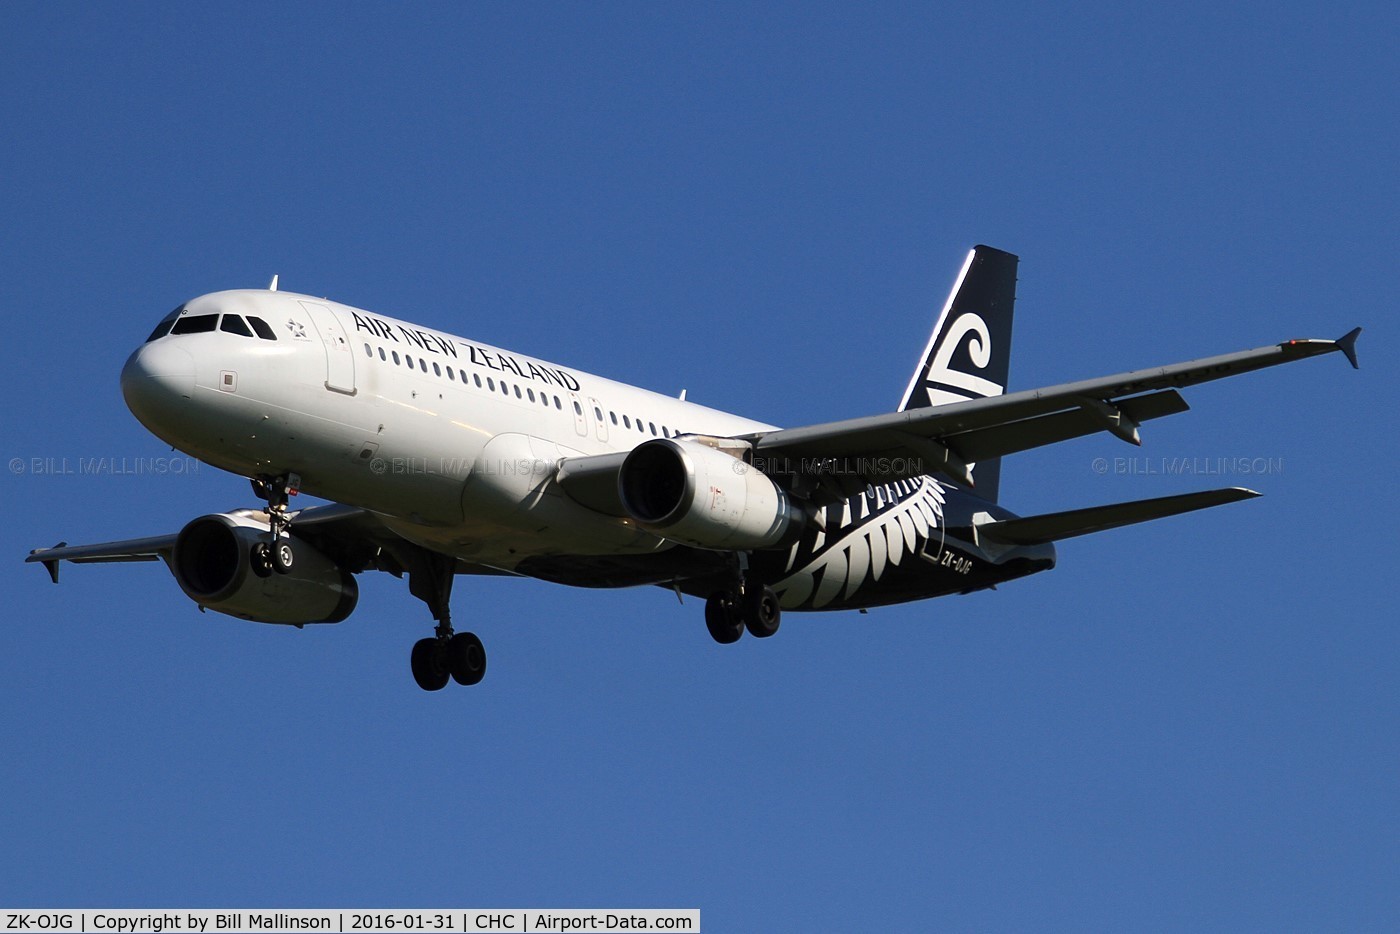 ZK-OJG, 2004 Airbus A320-232 C/N 2173, Arriving on 02 from MEL